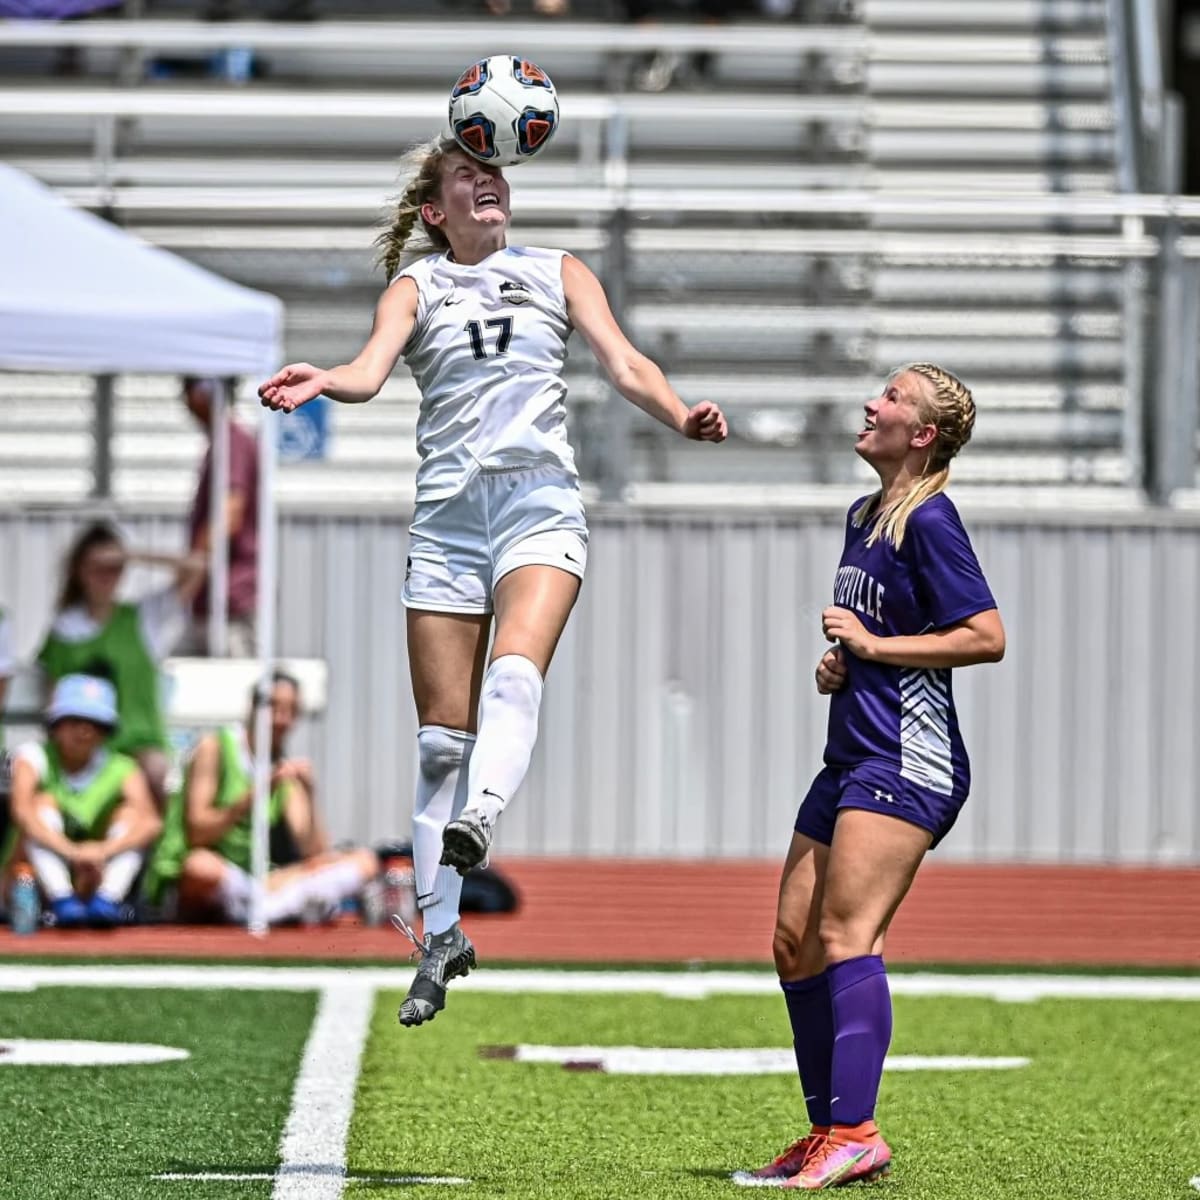 The Star's All-County Girls Soccer Player of the Year and First Team